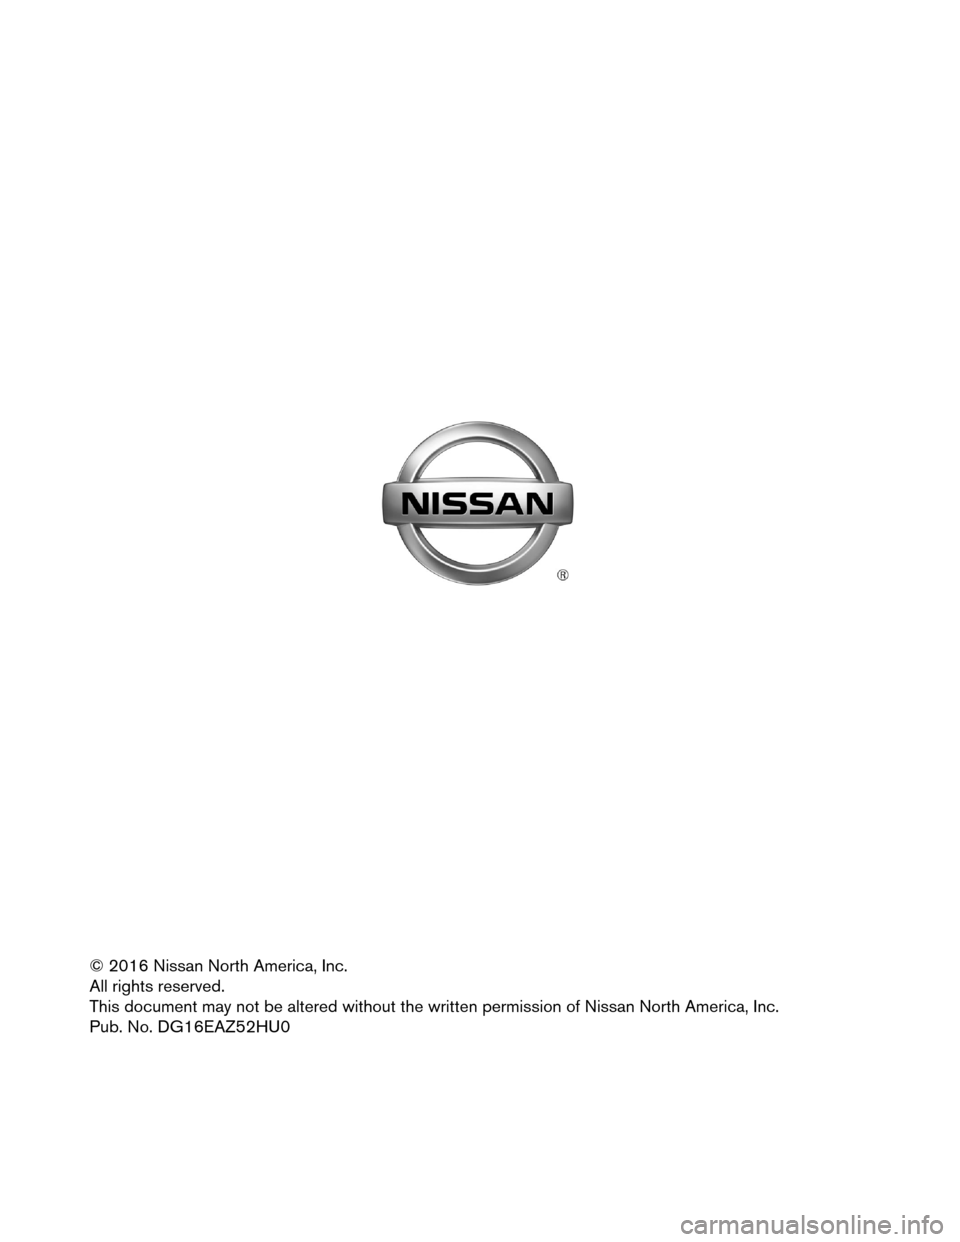 NISSAN MURANO HYBRID 2016 3.G Dismantling Guide © 2016 Nissan North America, Inc.
All
rights reserved.
This document may not be altered without the written permission of Nissan North America, Inc.
Pub. No. DG16EAZ52HU0  